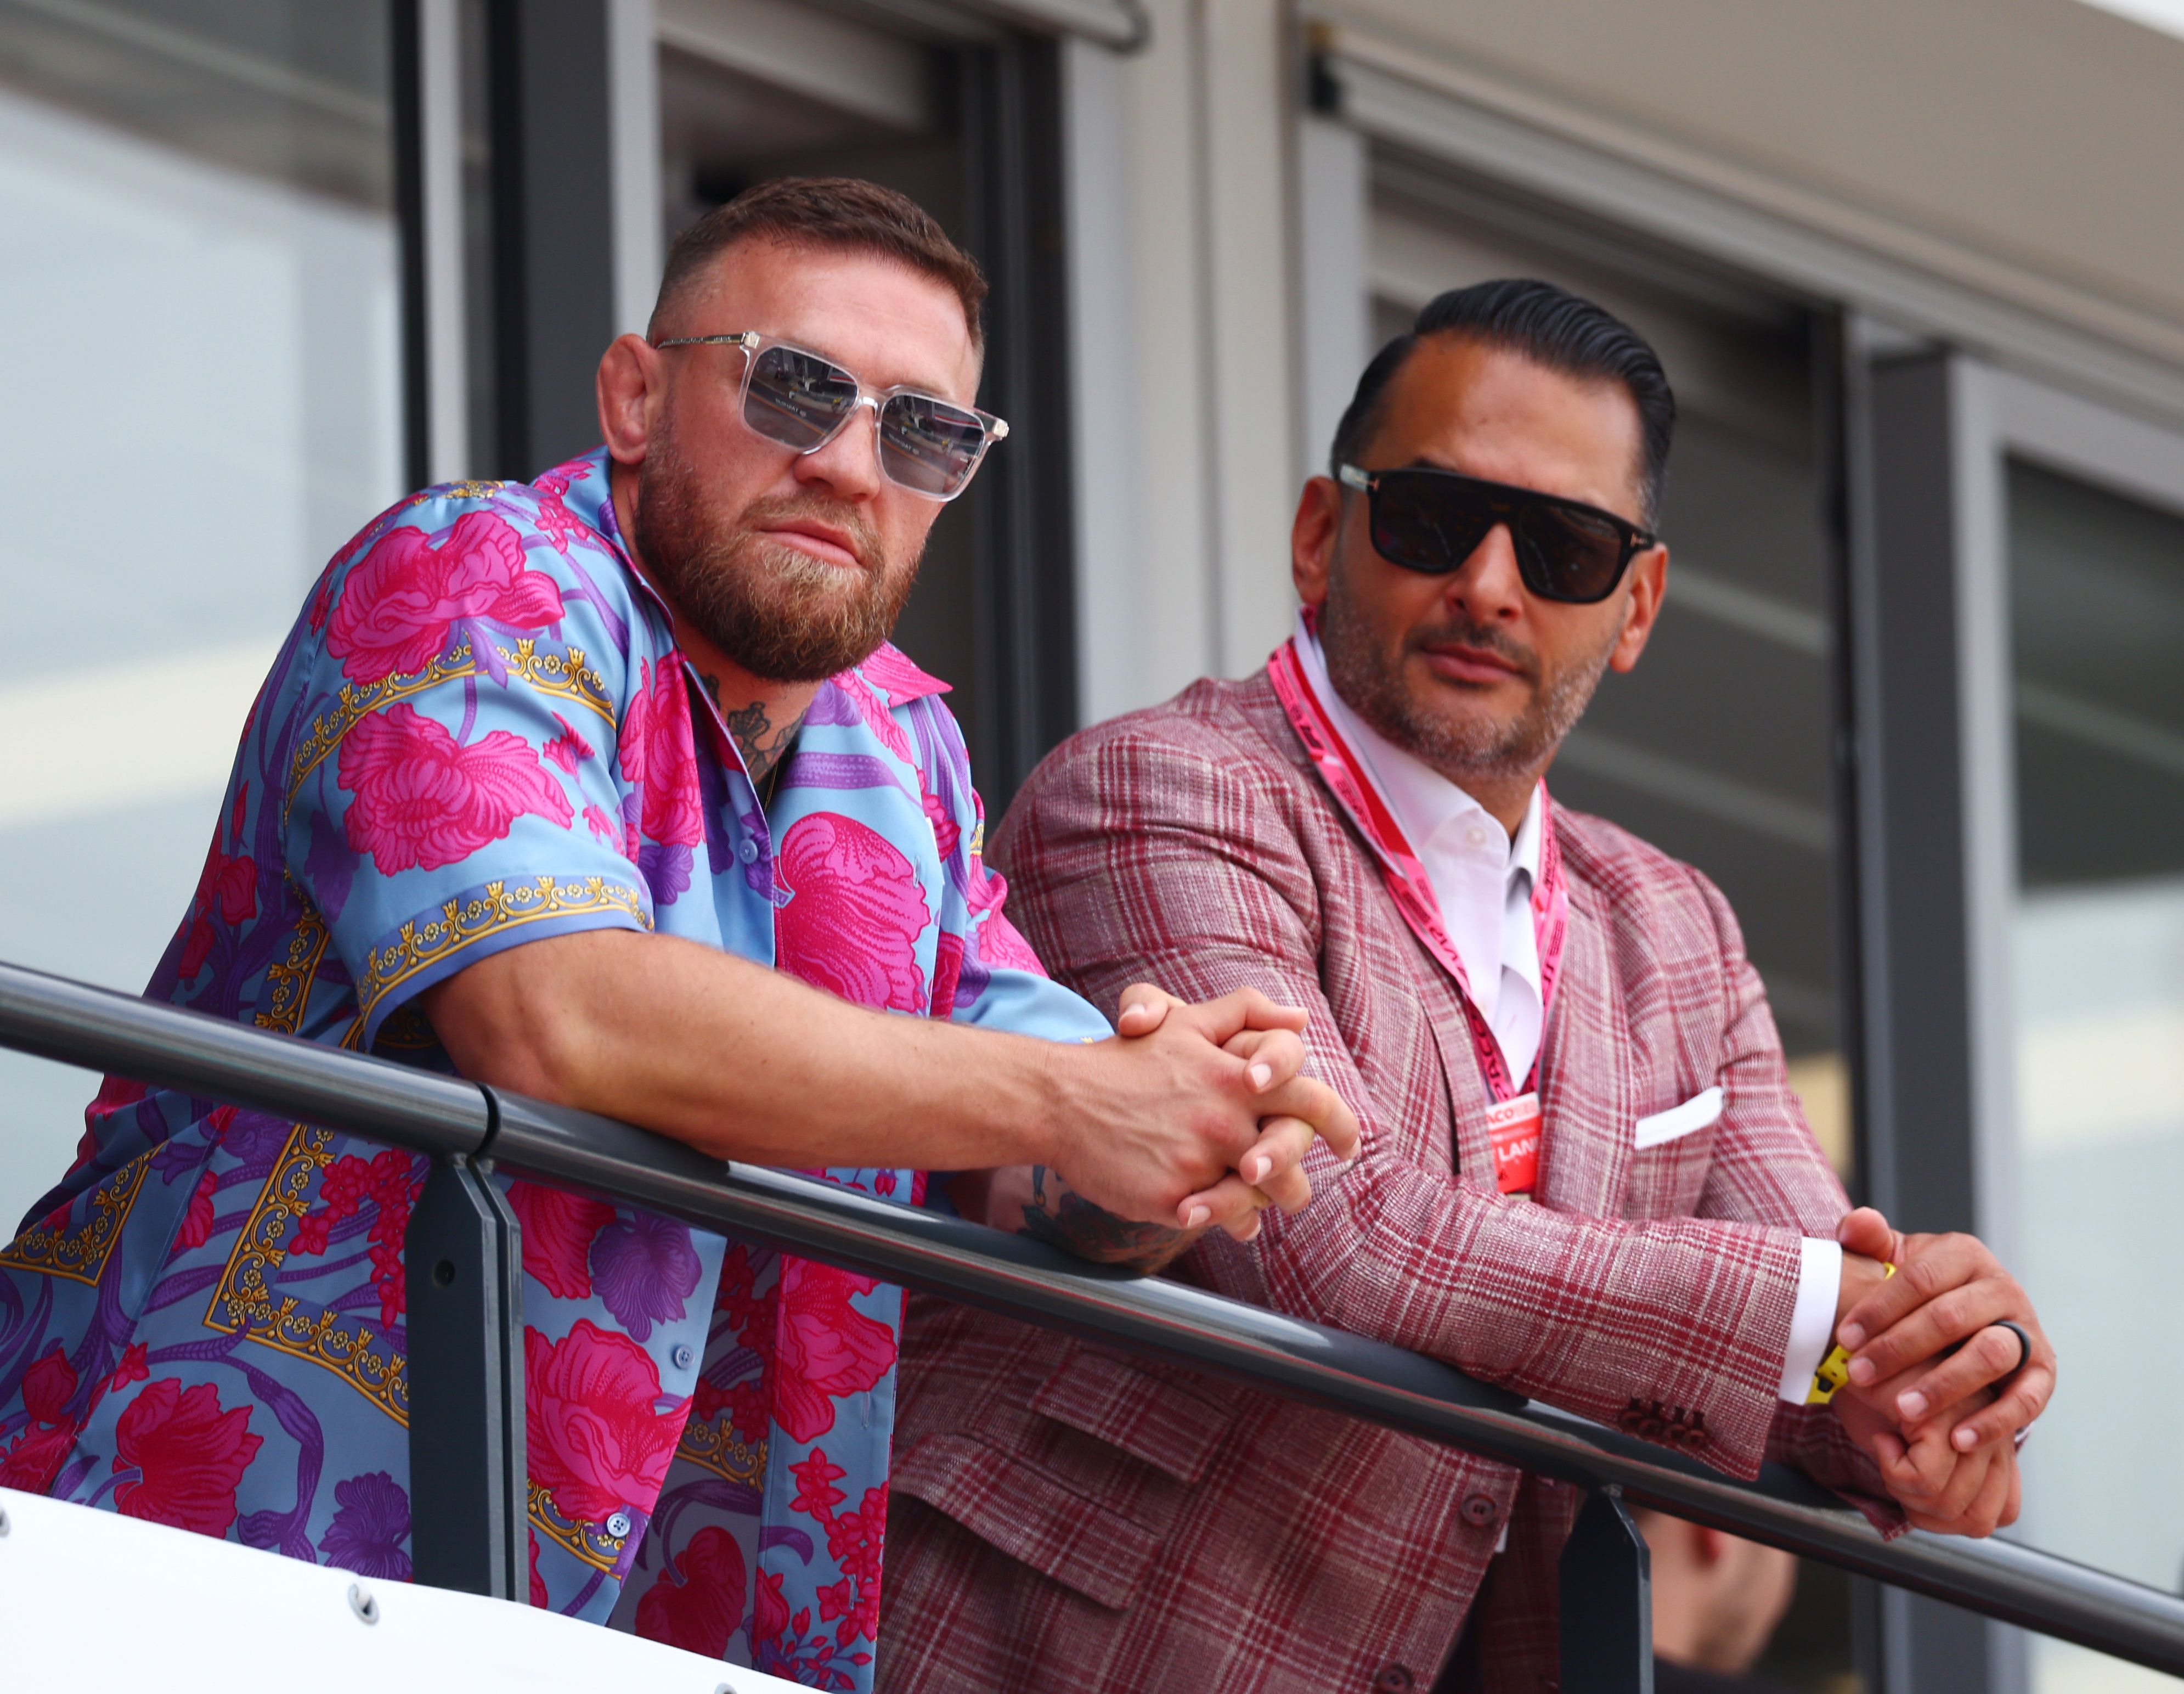 Conor McGregor enjoying his time away from UFC